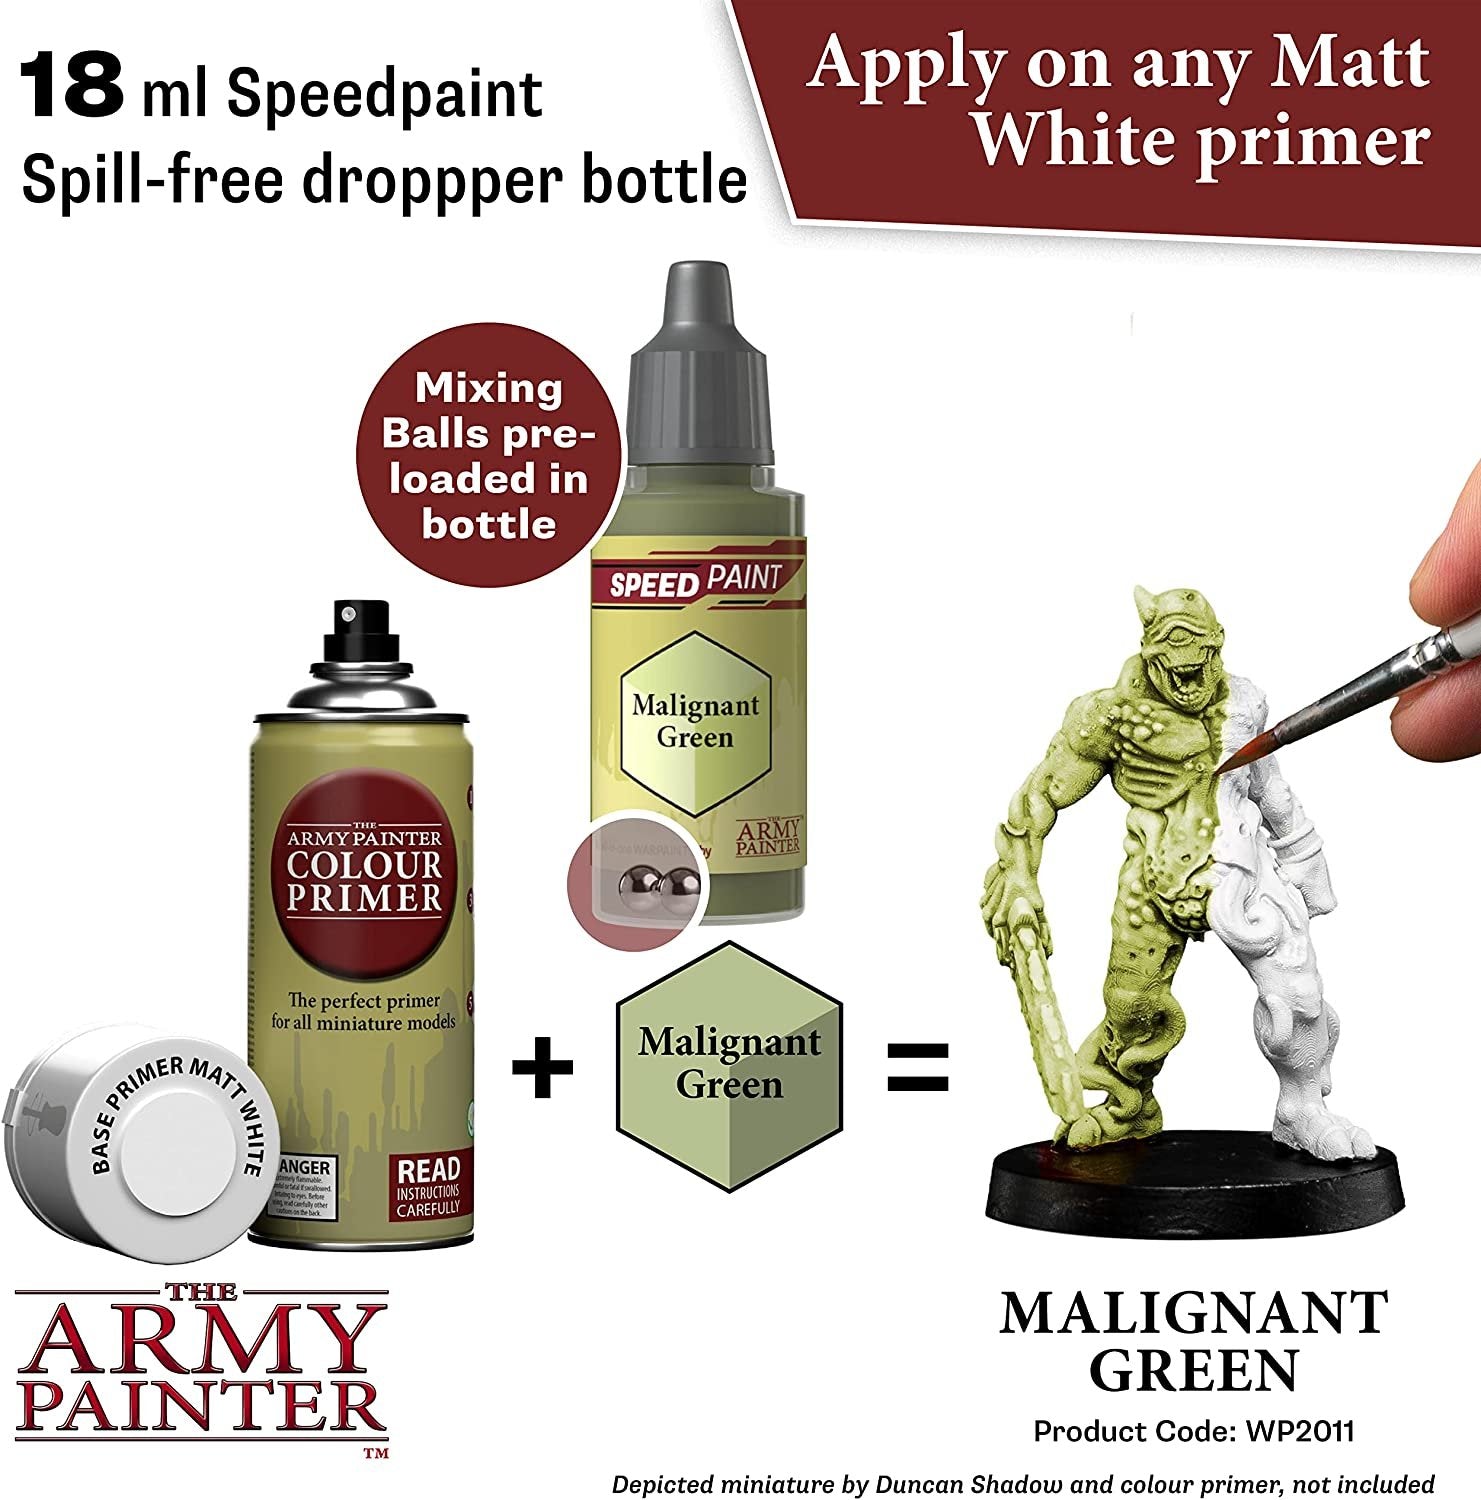 Army Painter Speedpaint: How They Really Look On Models